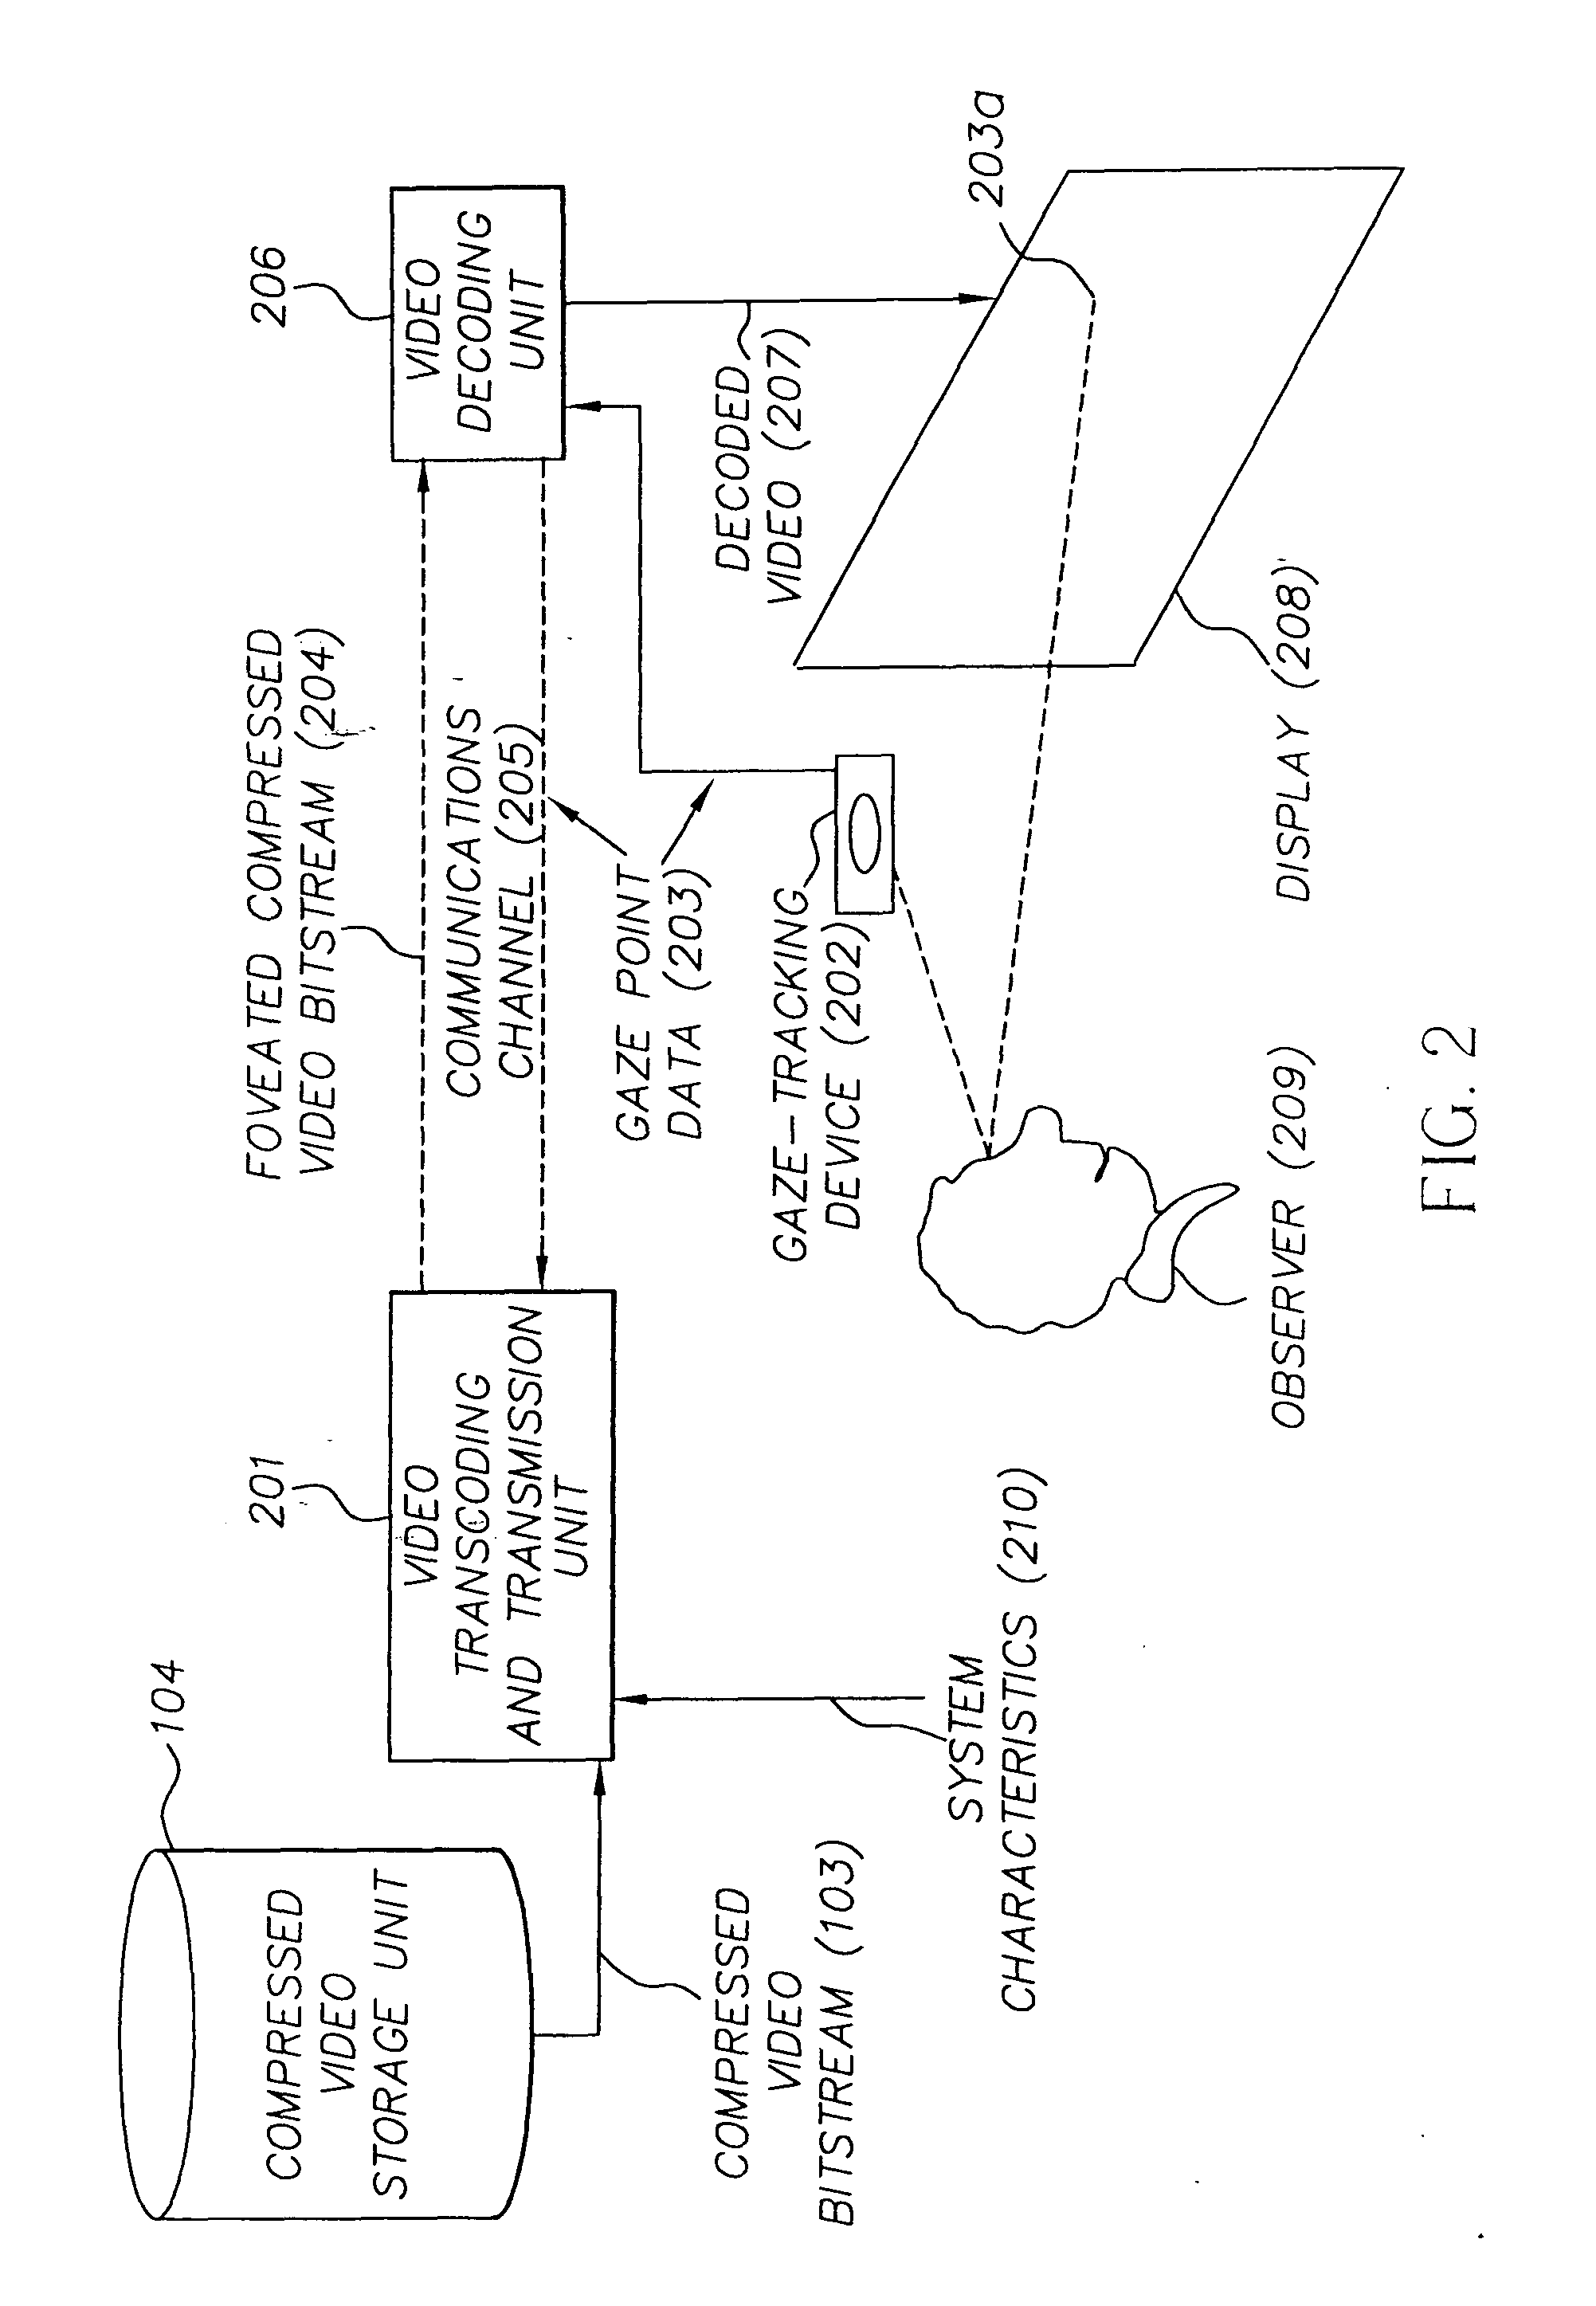 Foveated video coding system and method